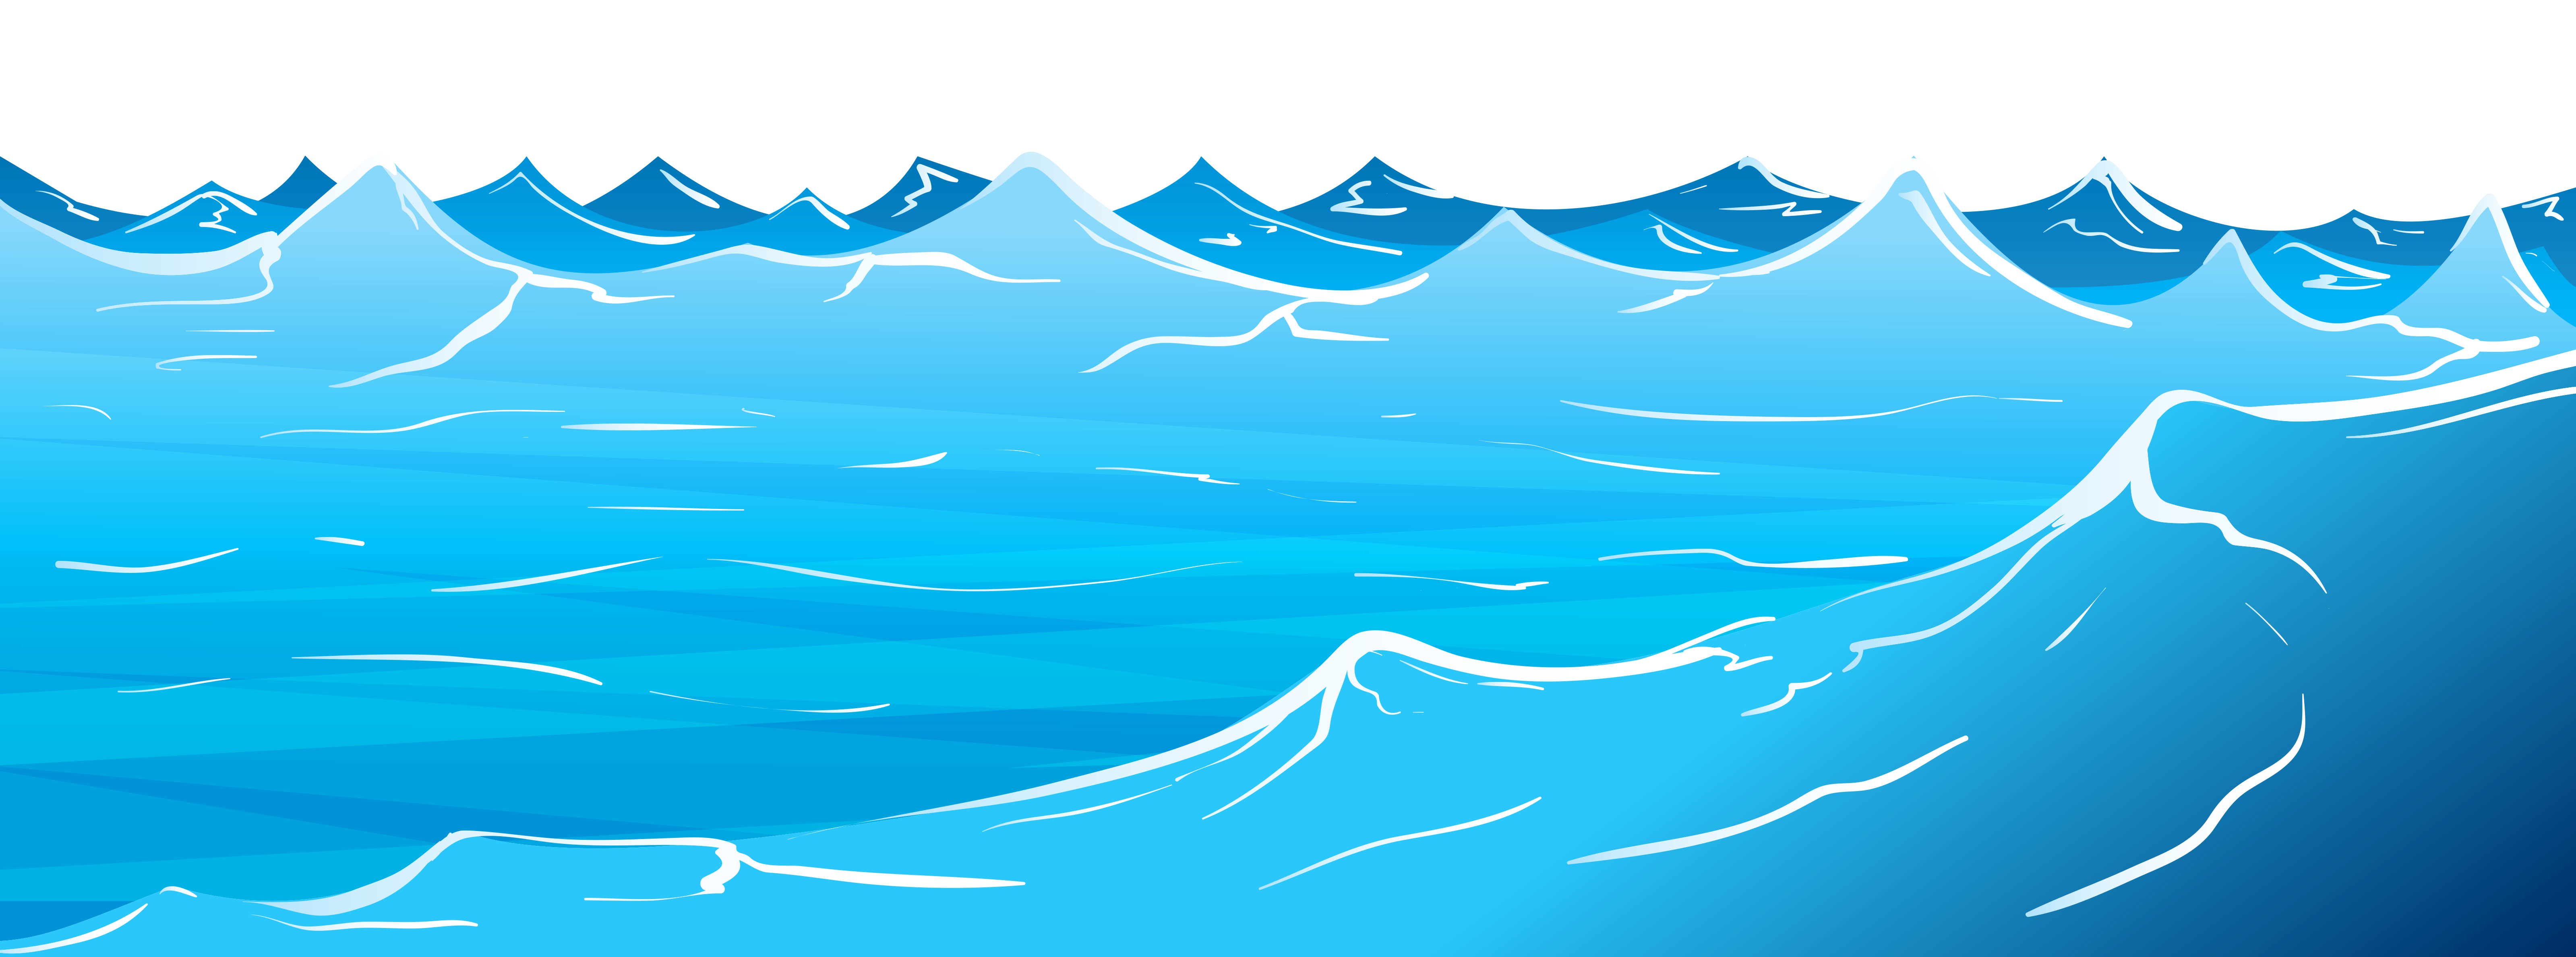 clipart water pictures - photo #27